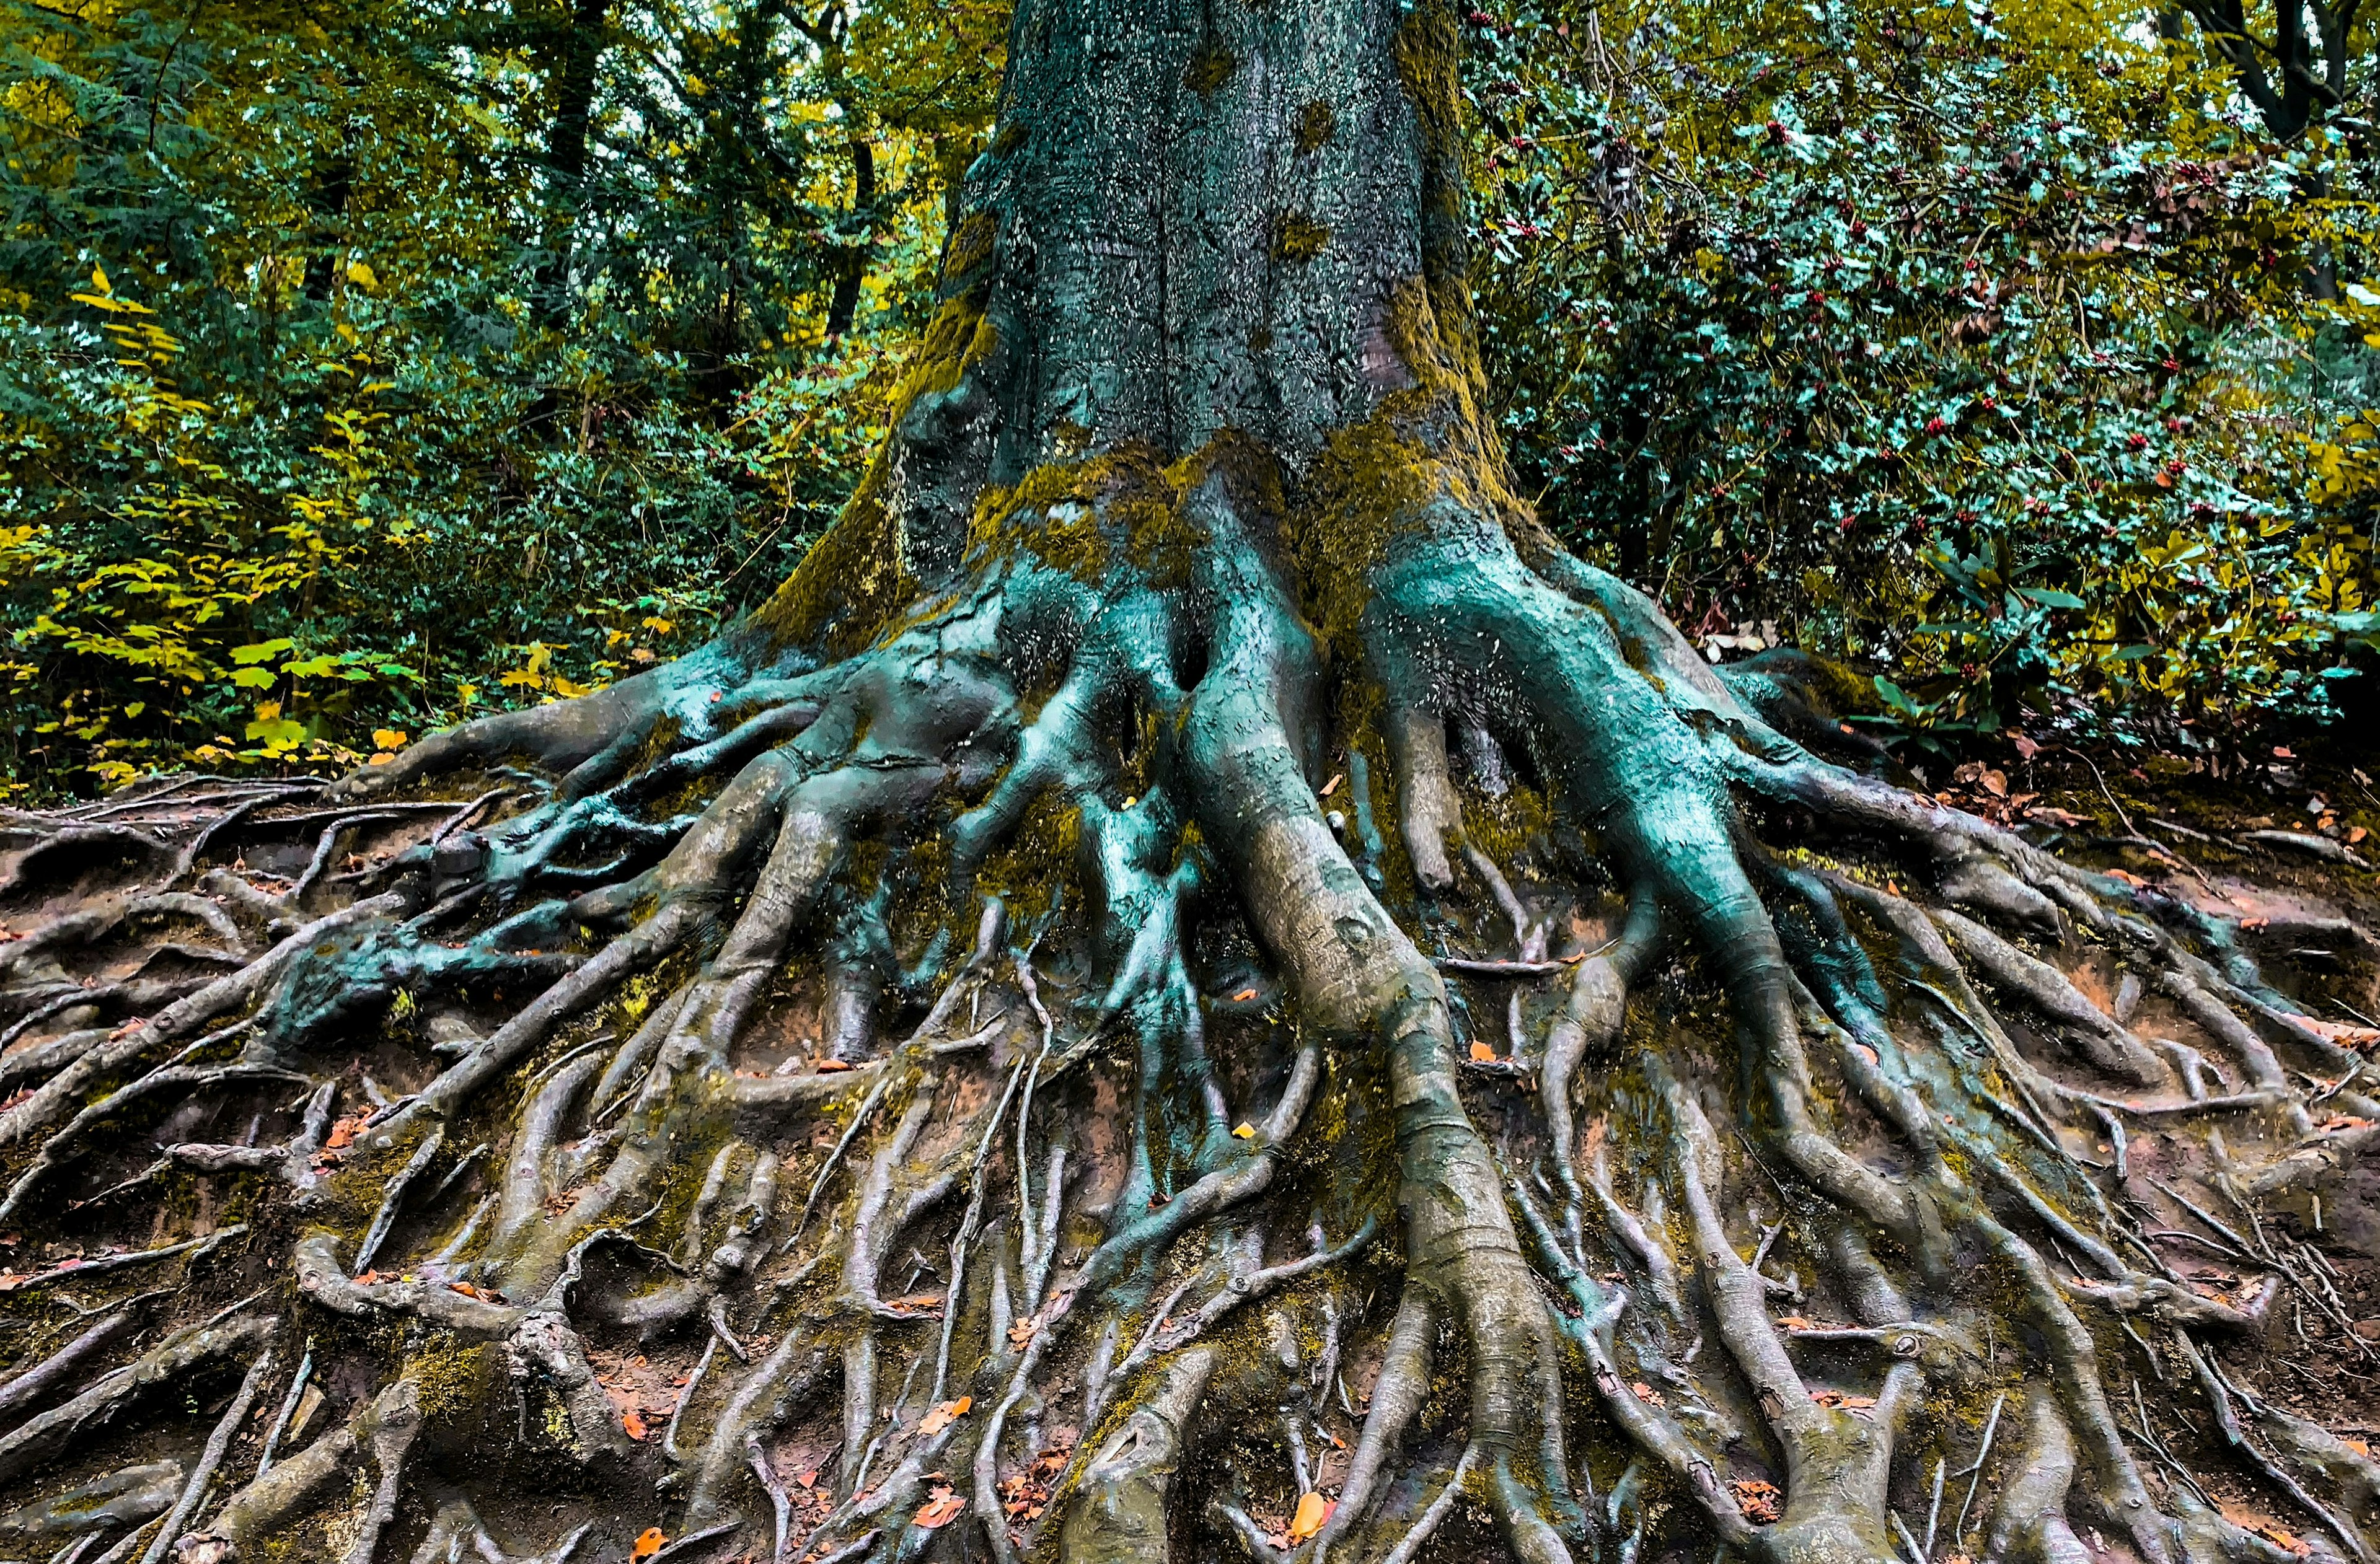 a tree with extensive roots spreading across the ground